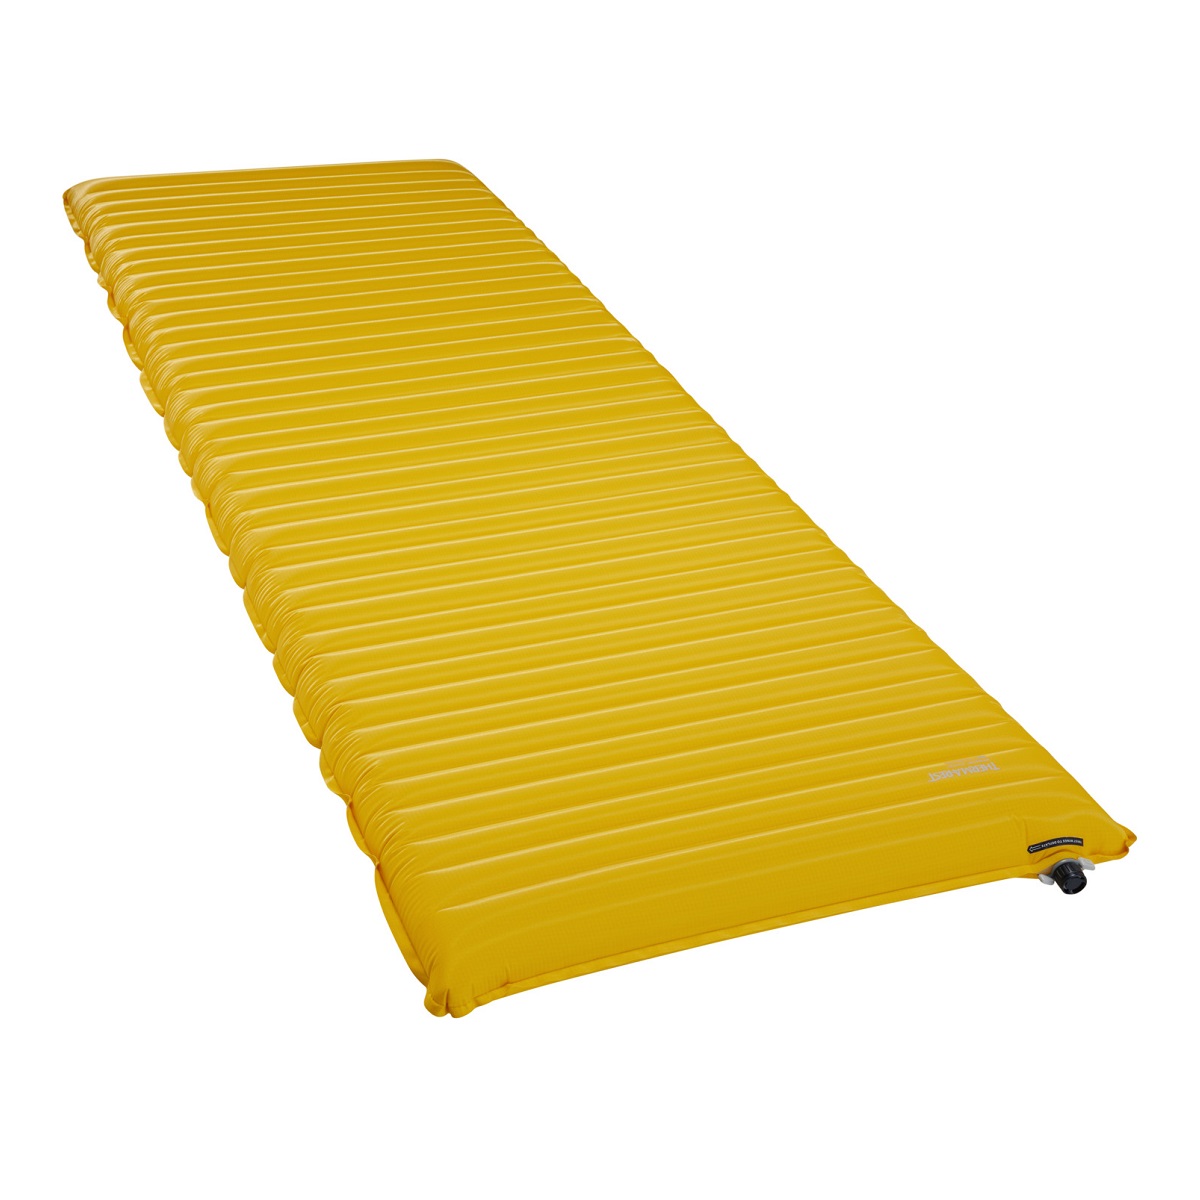 Therm-a-Rest Neoair XLite NXT MAX Sleeping Pad